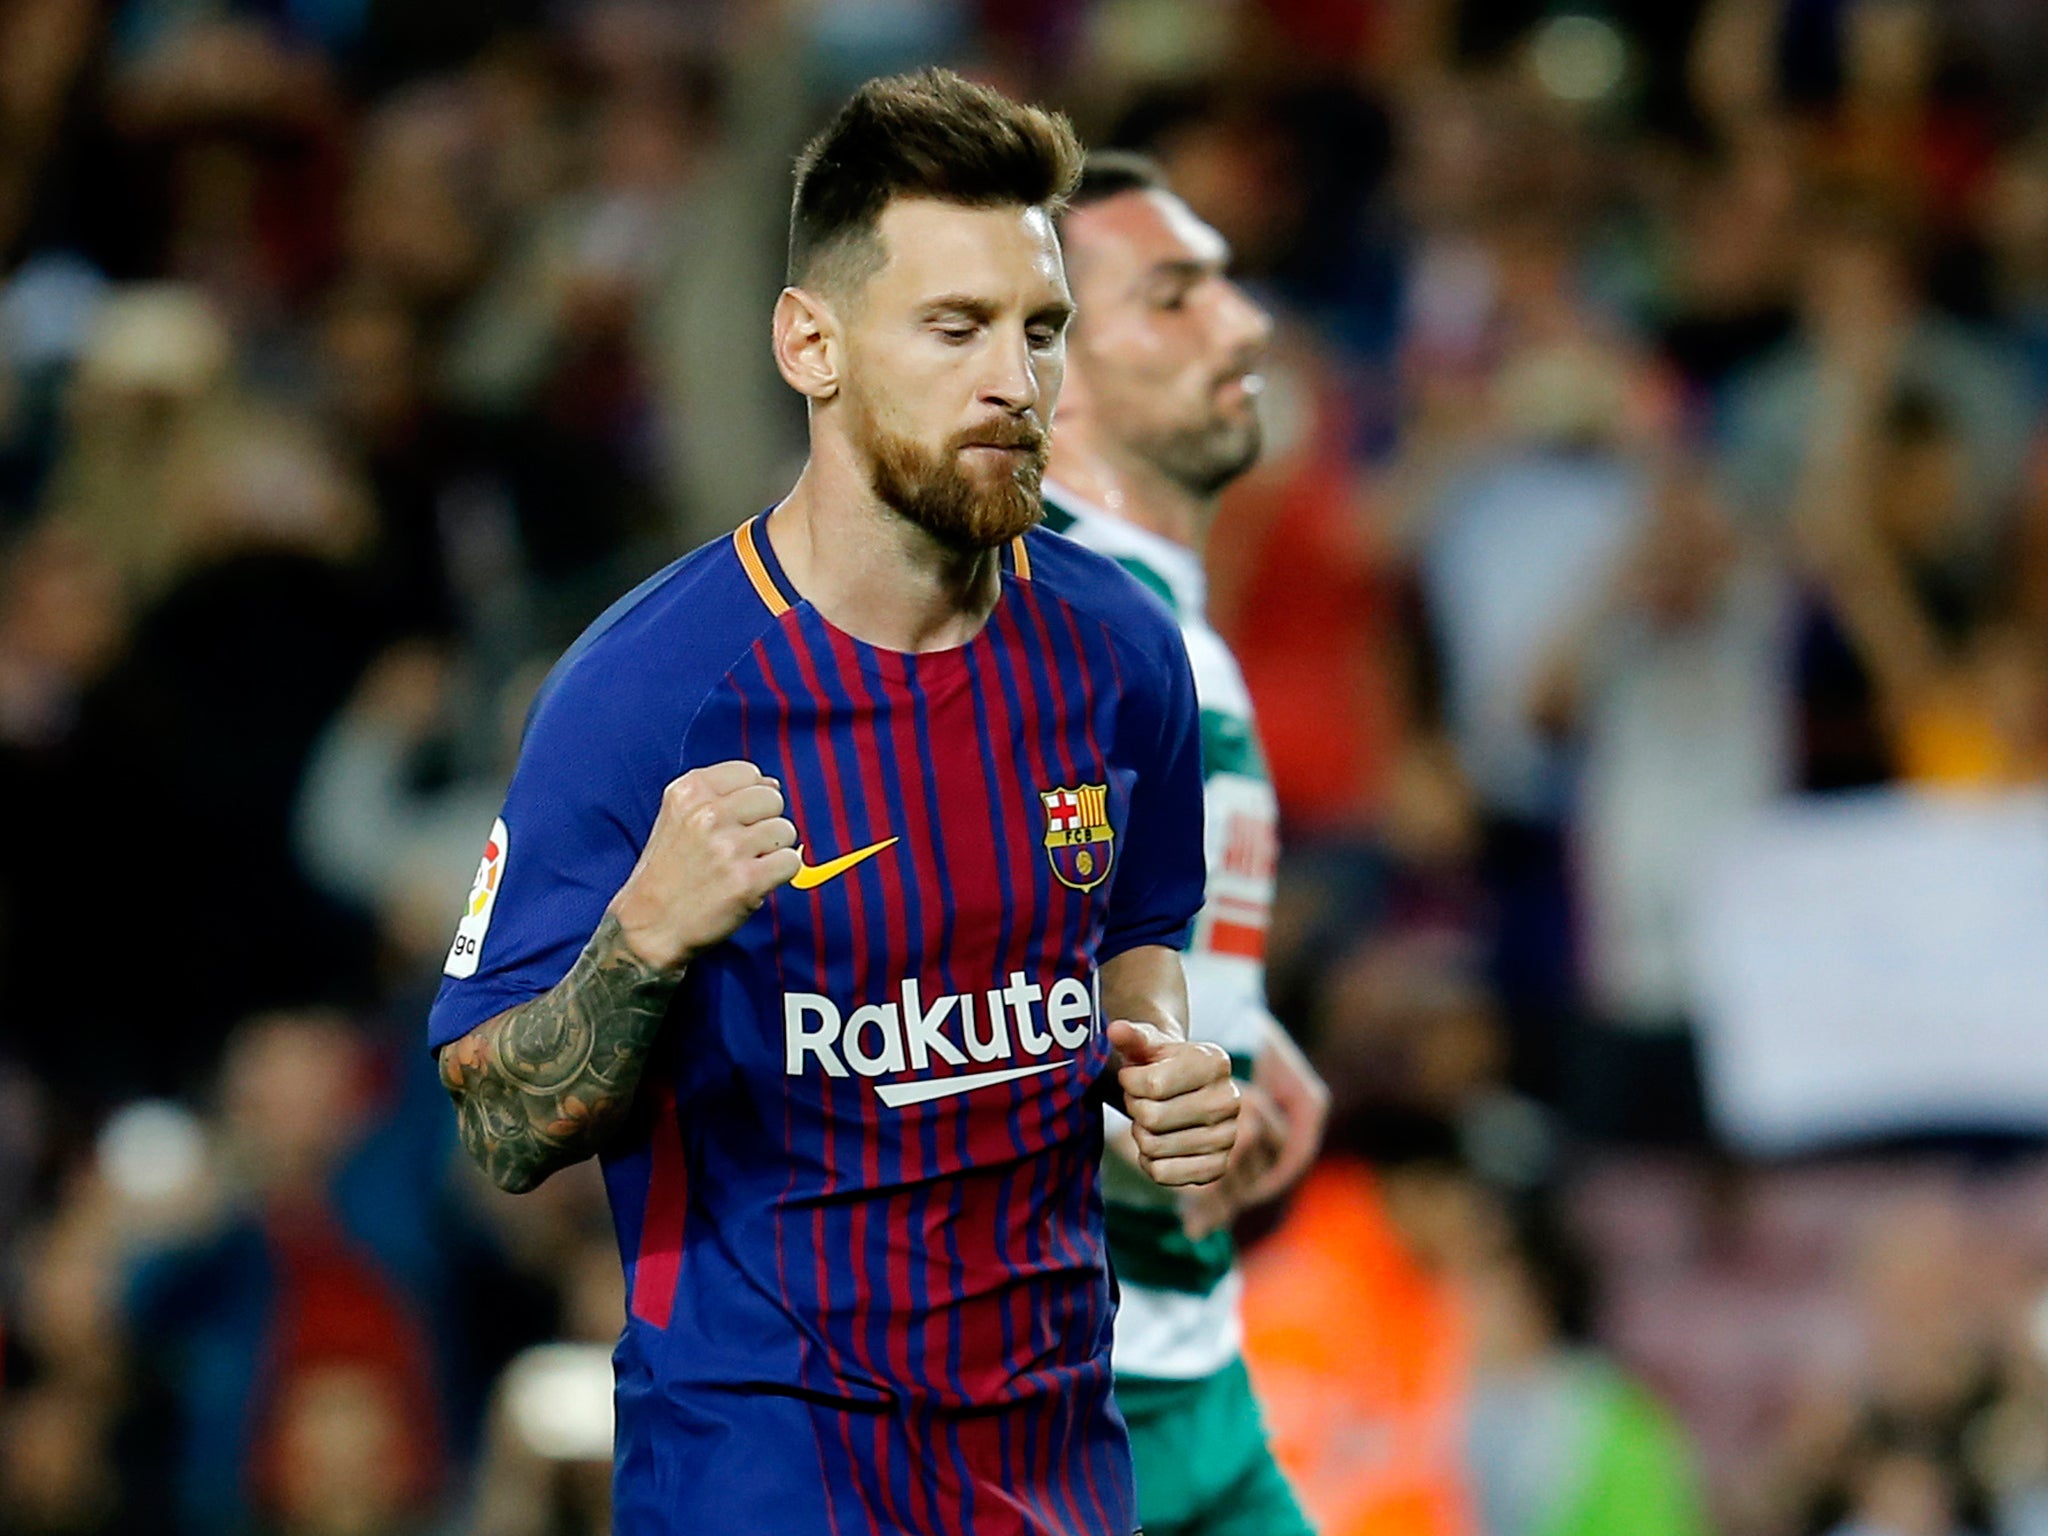 Lionel Messi scored four times against Eibar in Barcelona's 6-1 victory